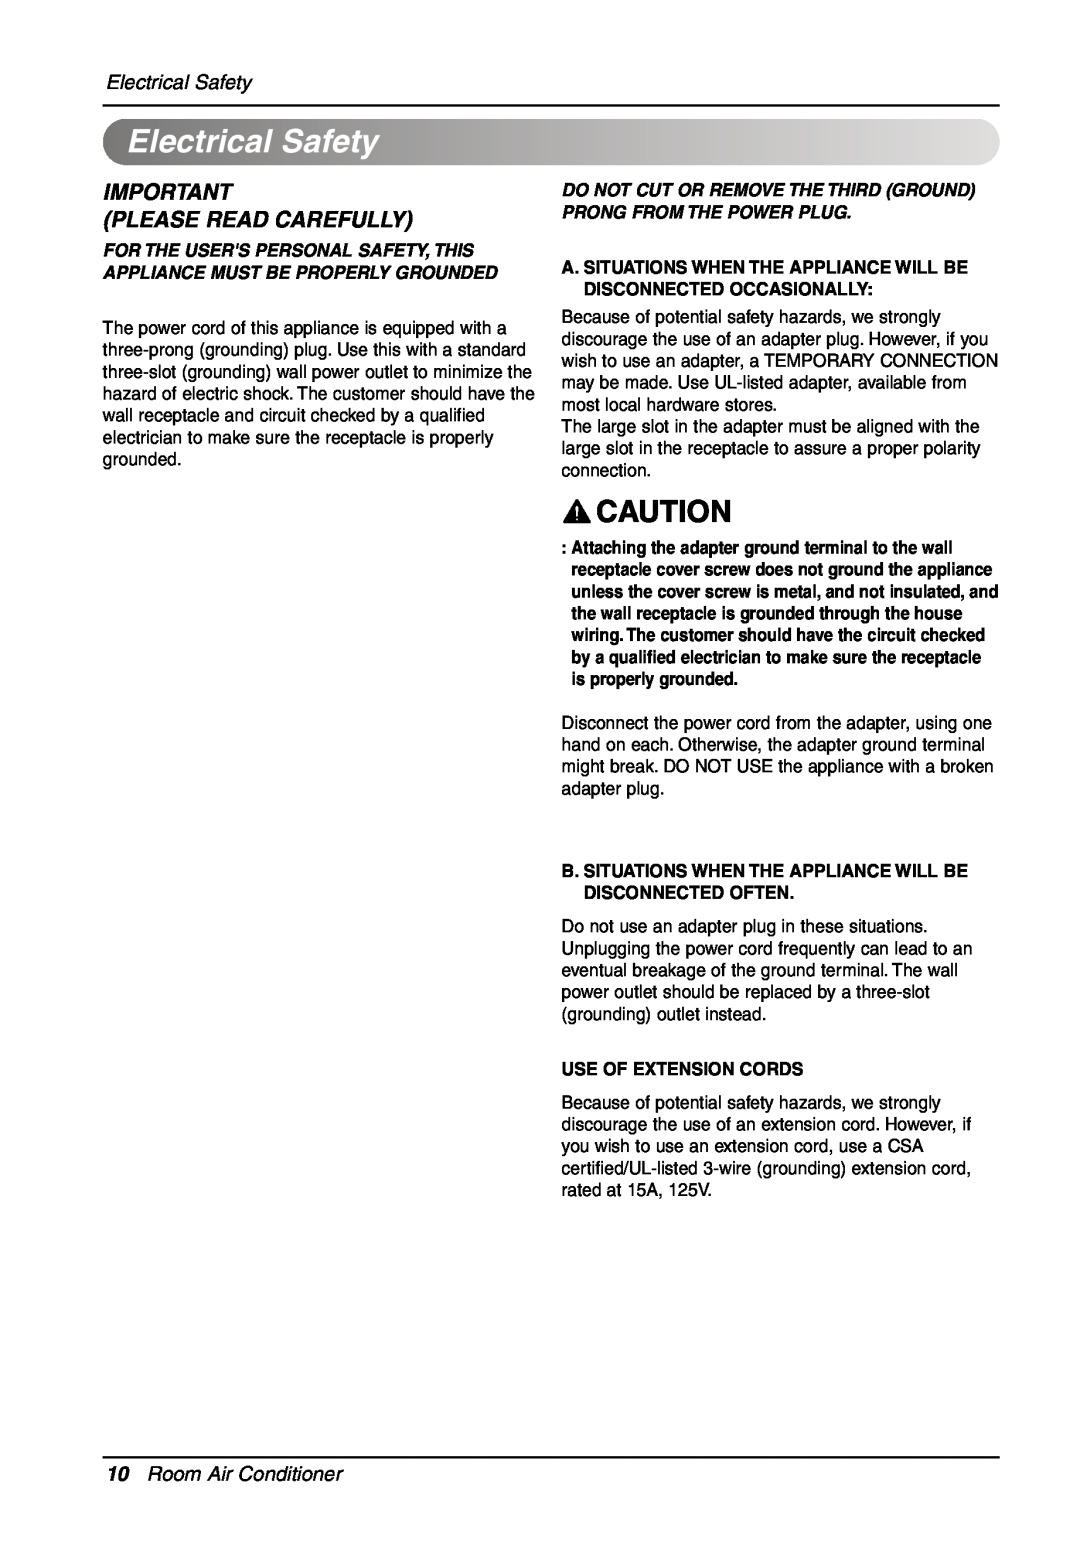 LG Electronics LW701 HR owner manual ElectricalSafety, Please Read Carefully, Electrical Safety, Room Air Conditioner 